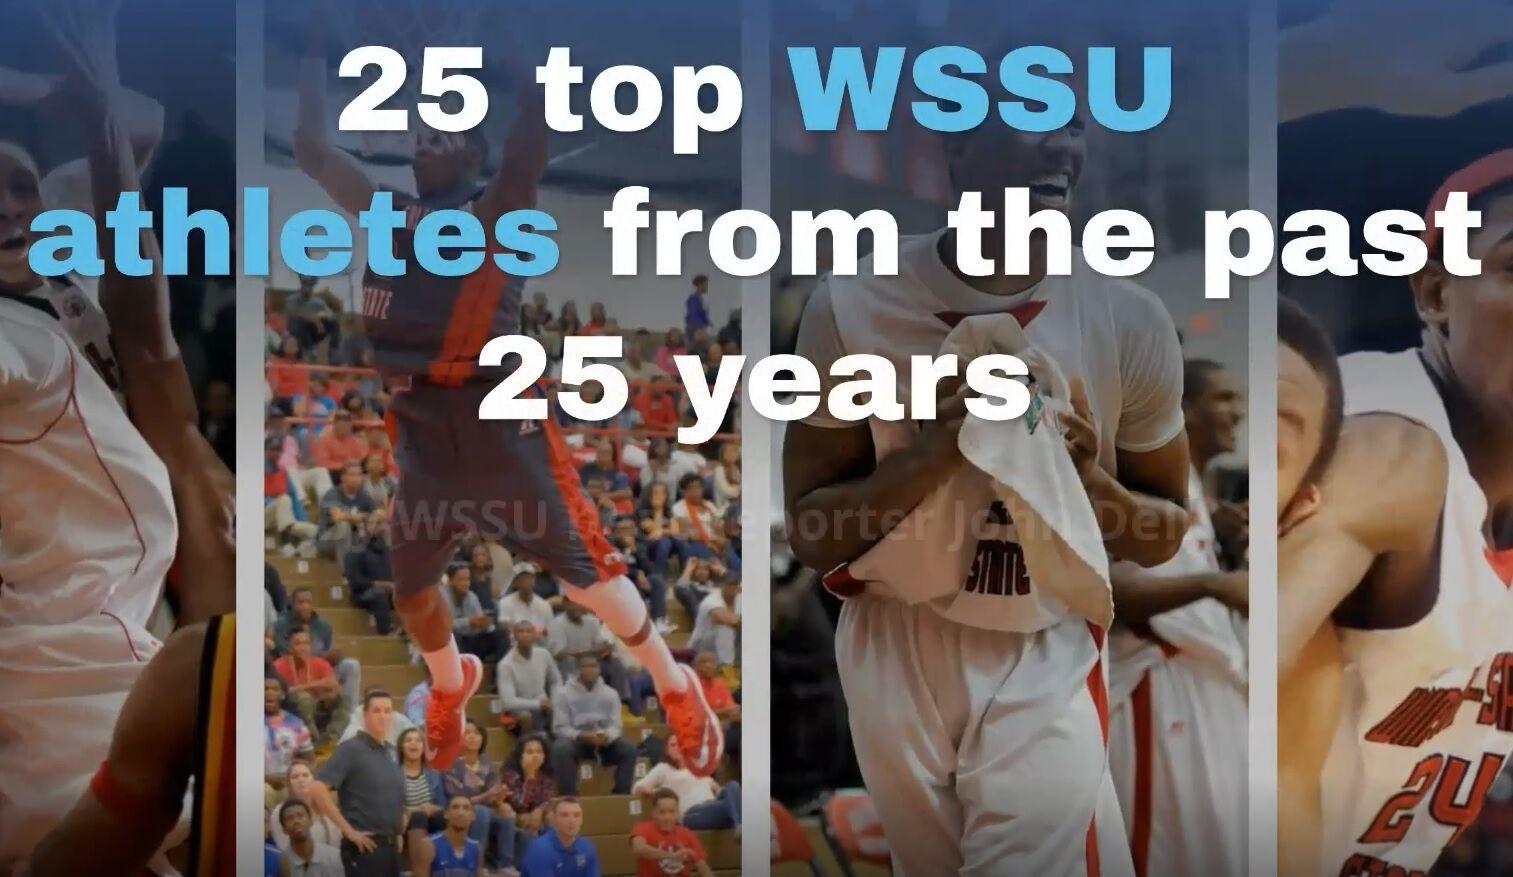 WSSU Athletics on X: Here are some of the top photos by WSSU